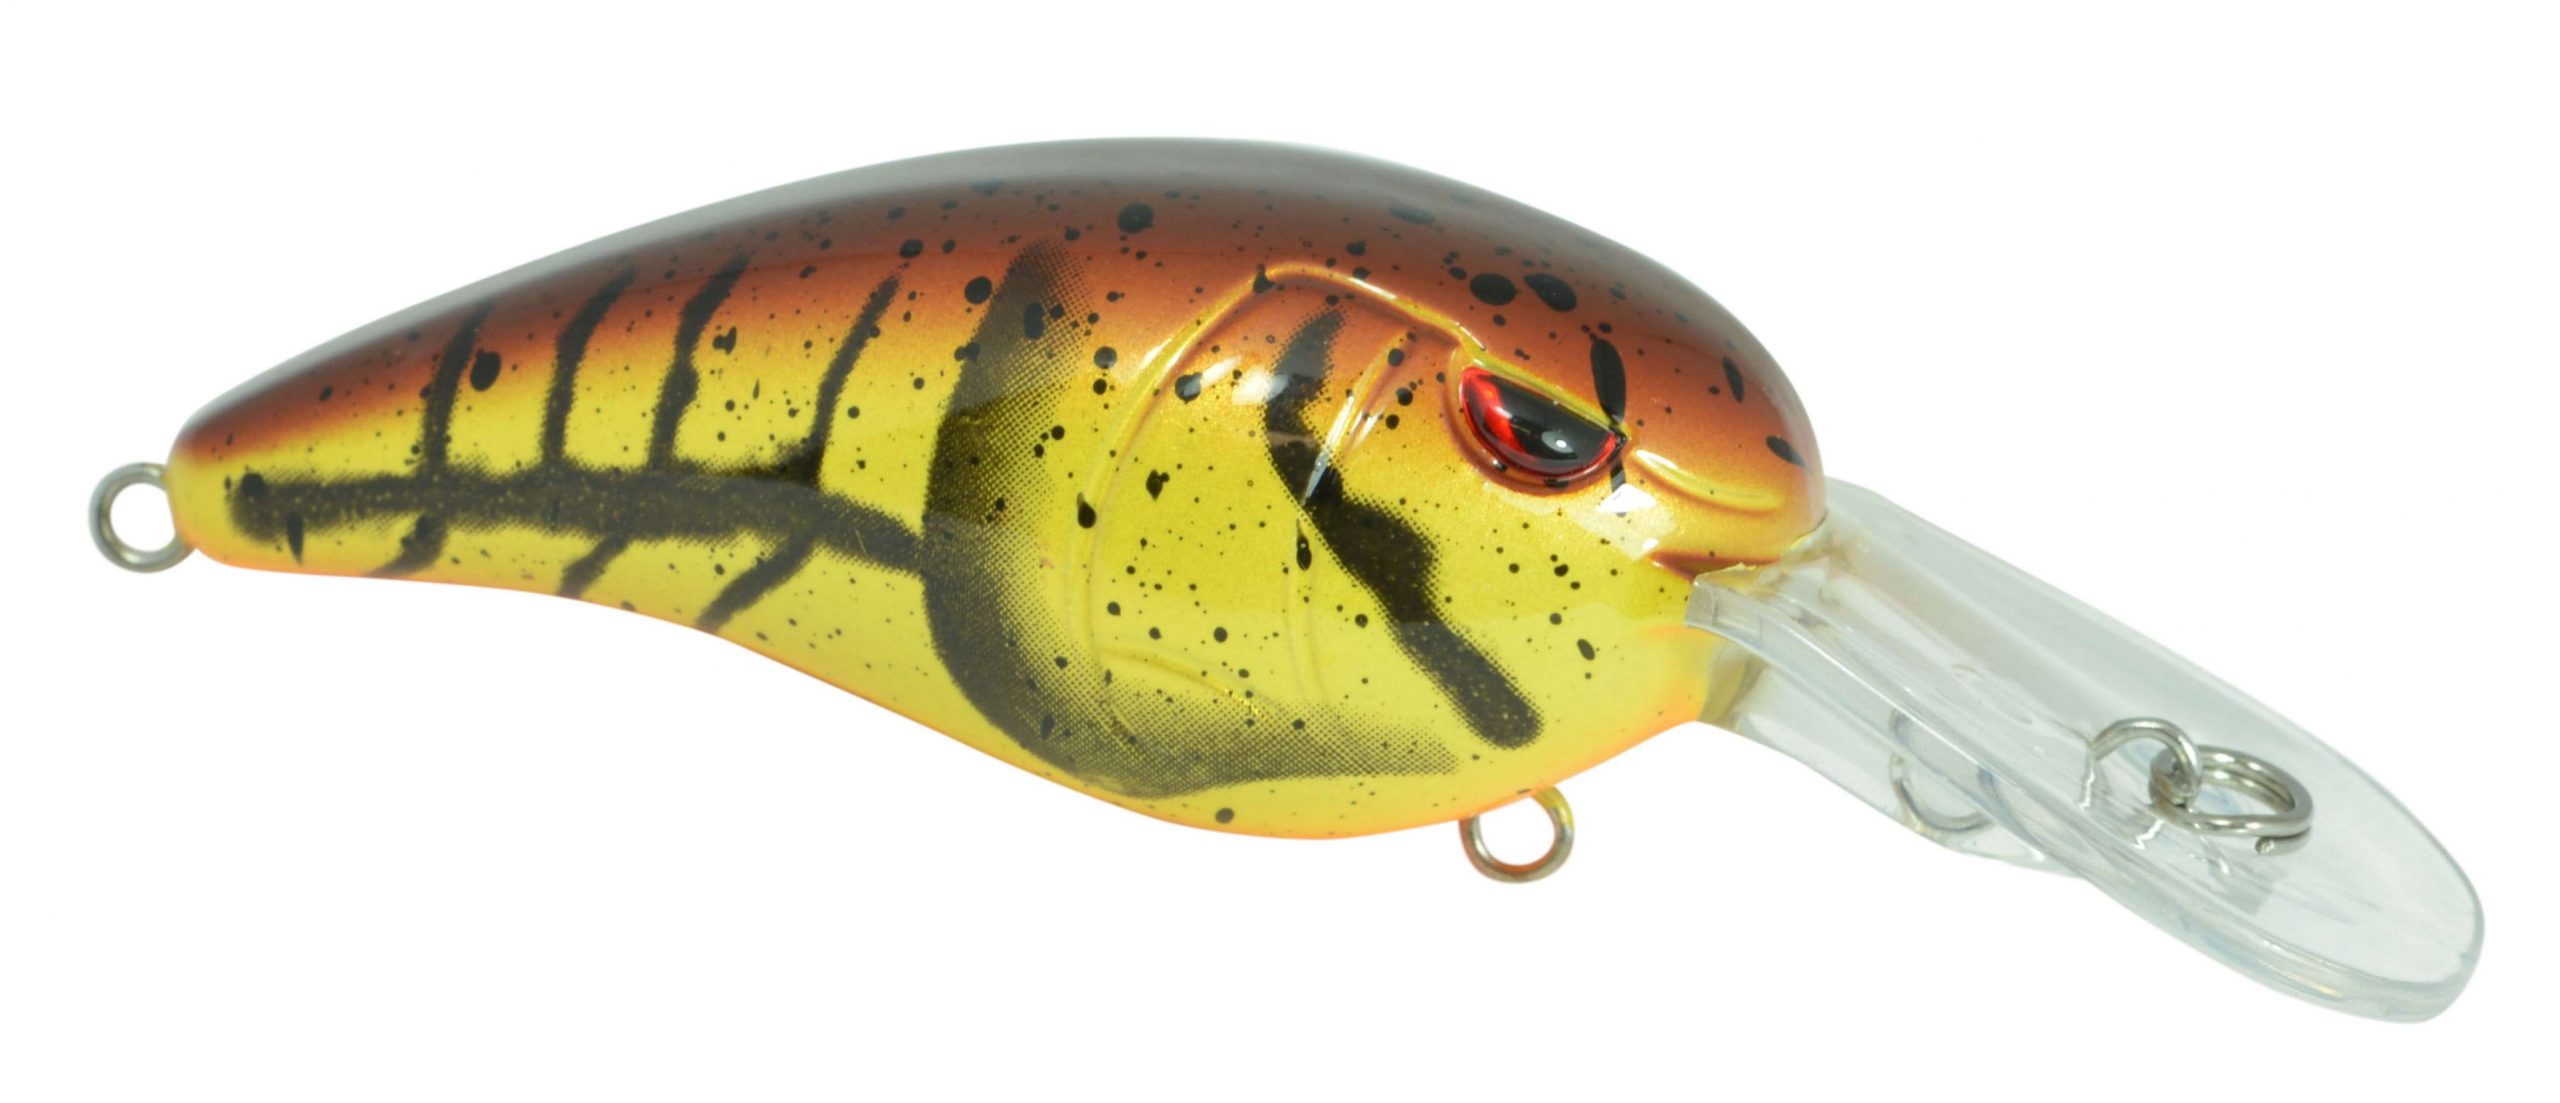 RkCrawler MD 55<BR>
Spro<br>
The RkCrawler MD 55 crankbait was designed by Bassmaster Elite Series Angler Mike McClelland. The RkCrawler MD 55 features all the benefits of the RkCrawler 55. With a shallower dive angle bill, this bait will be able to come through rocks more like a square bill crankbait deflecting off of the cover and drawing more strikes. When the fish are shallower then 7 feet, the RkCrawler MD 55 should be your go-to RkCrawler.
